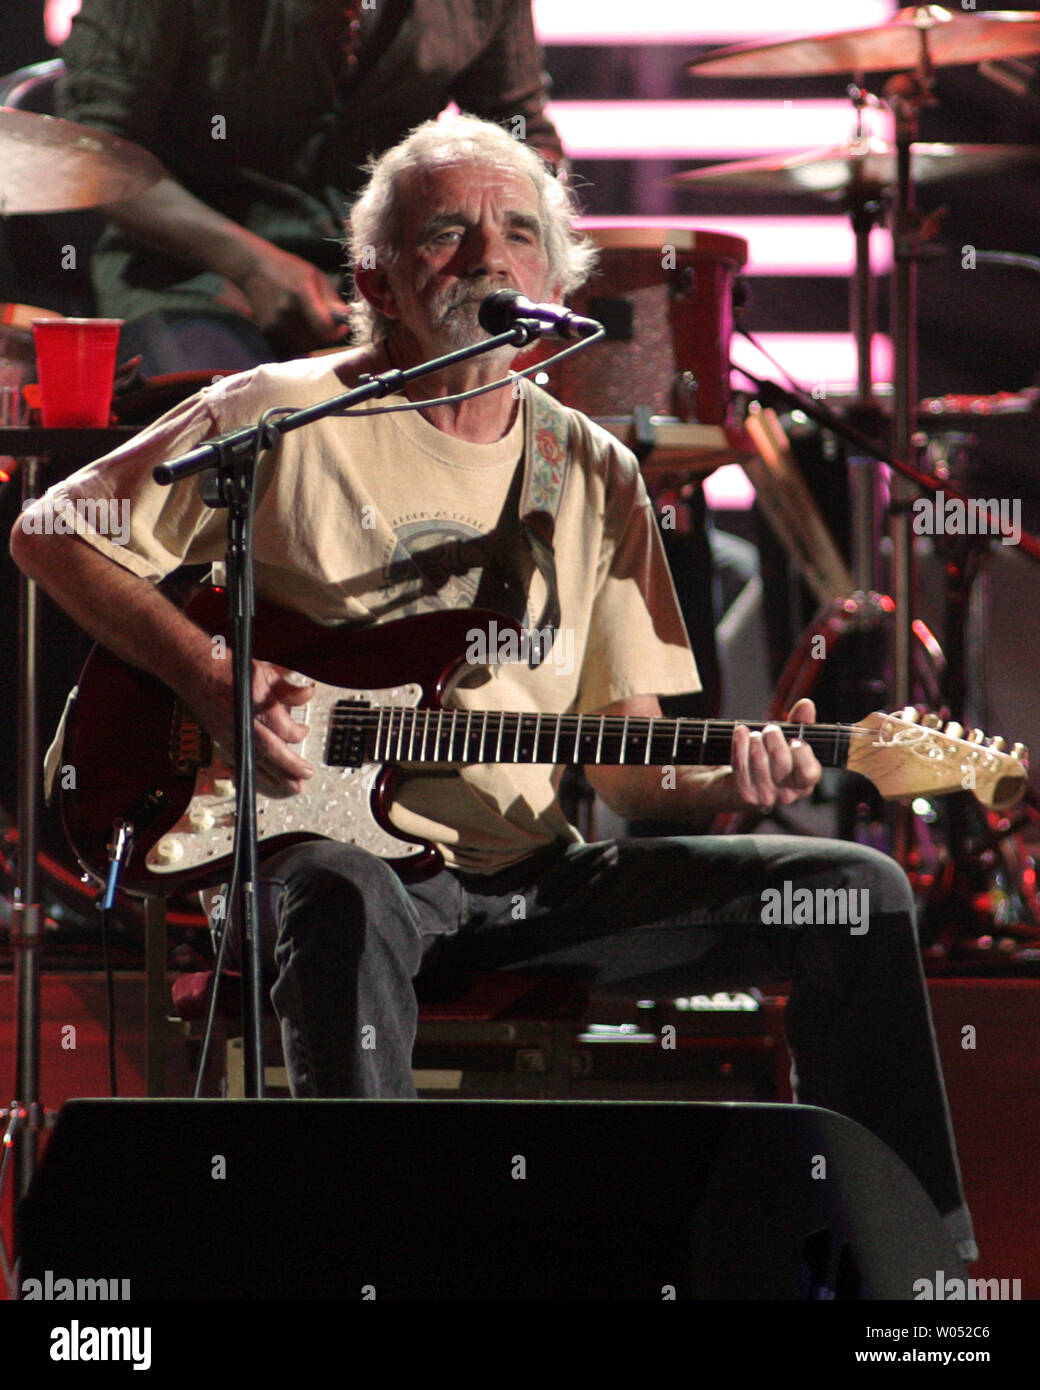 J.J. Cale performs in concert with Eric Clapton at the ipayOne Center in San Diego on March 15, 2007.   (UPI Photo/Roger Williams) Stock Photo